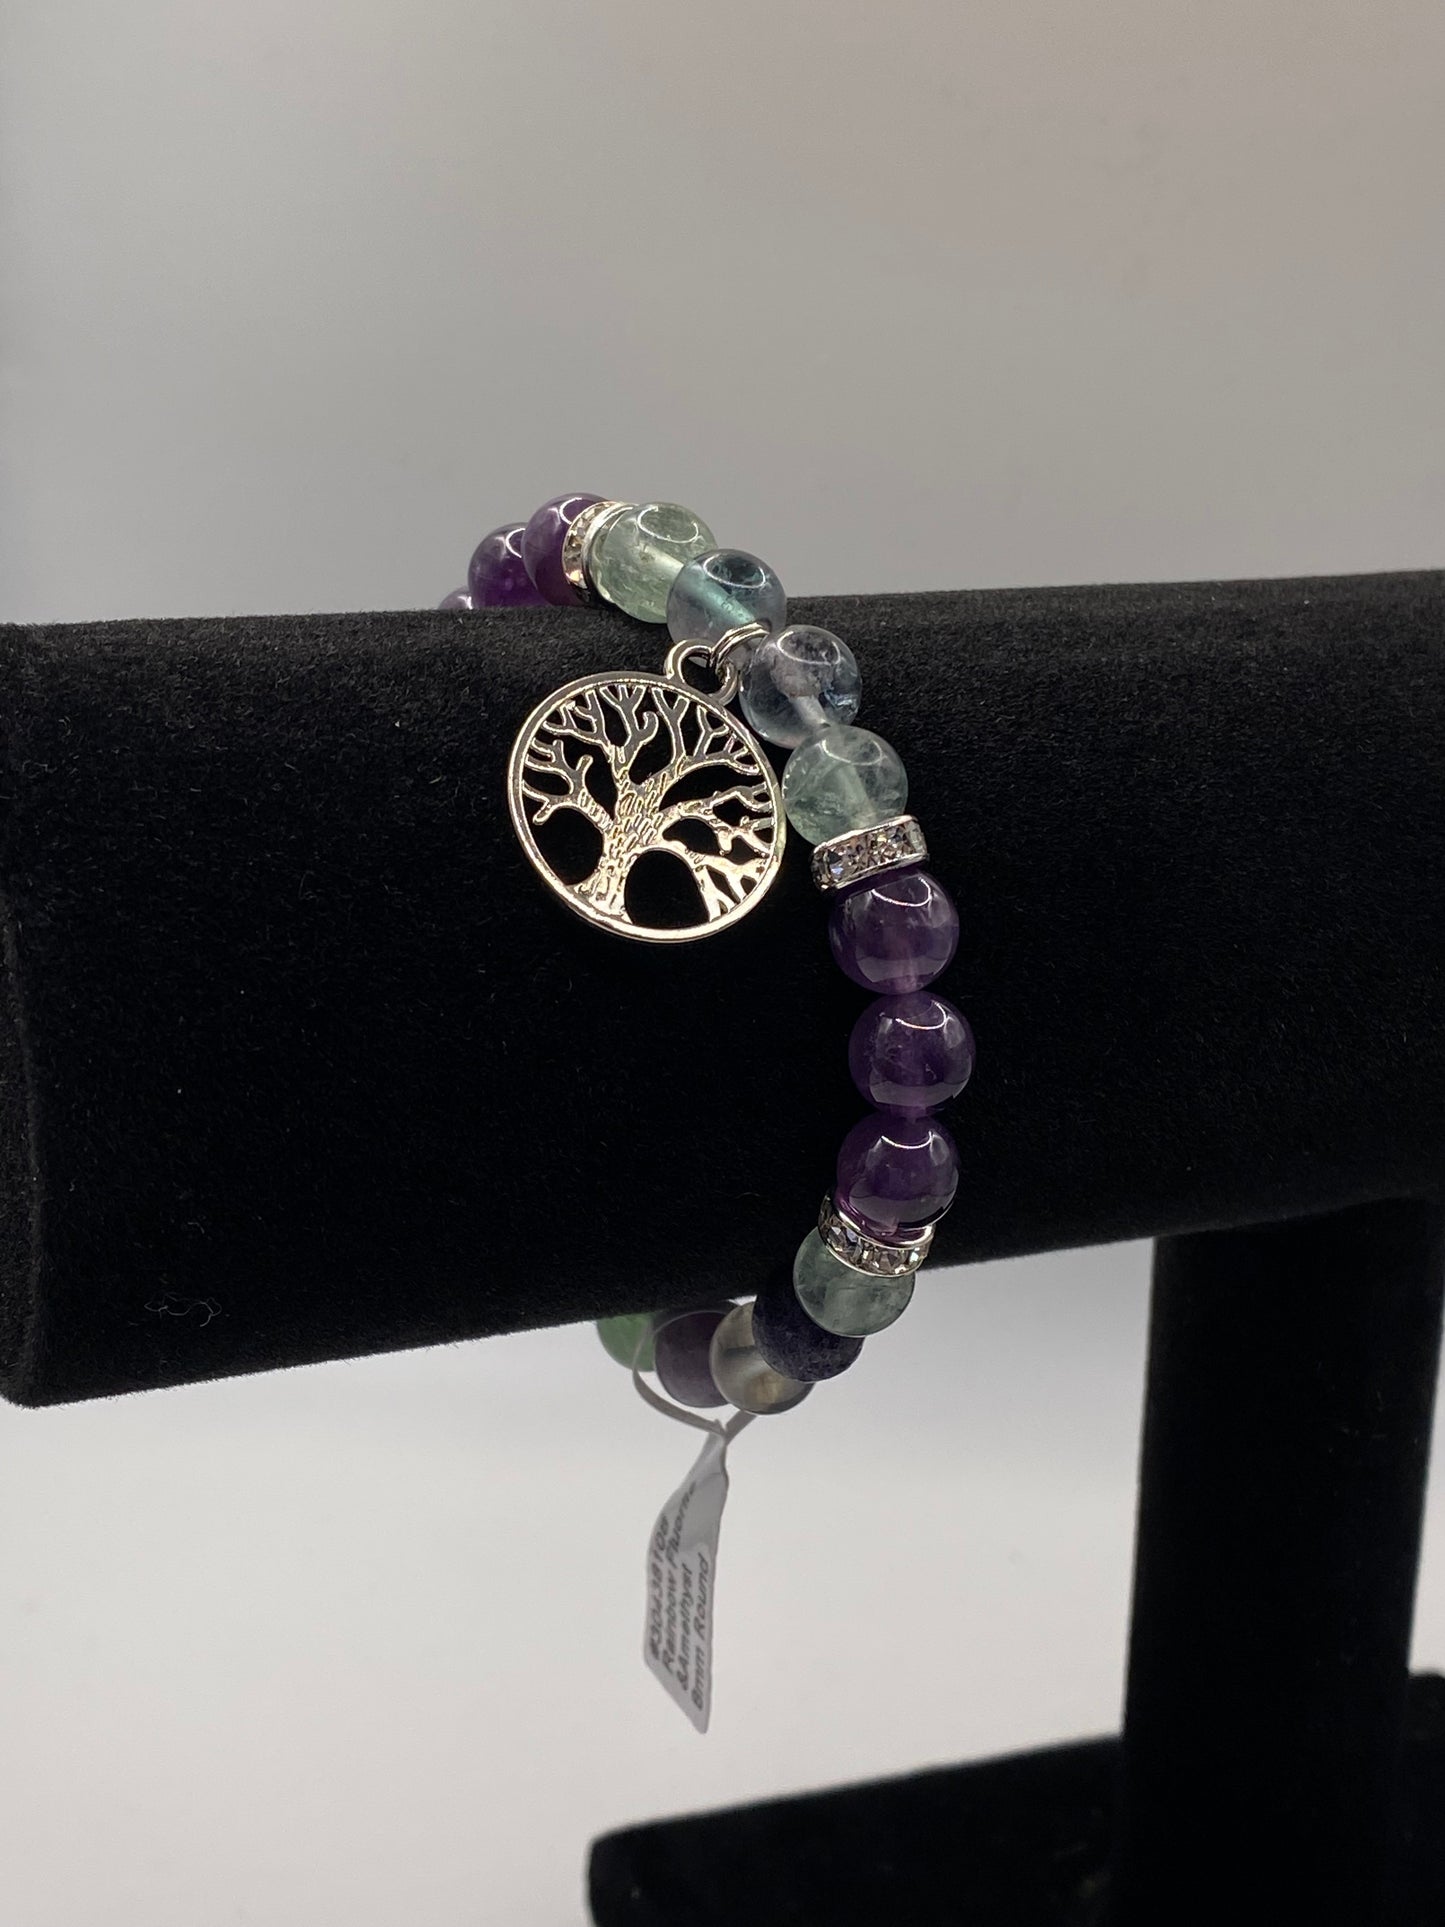 Celtic Tree of Life Bracelet with Amethyst and Fluorite